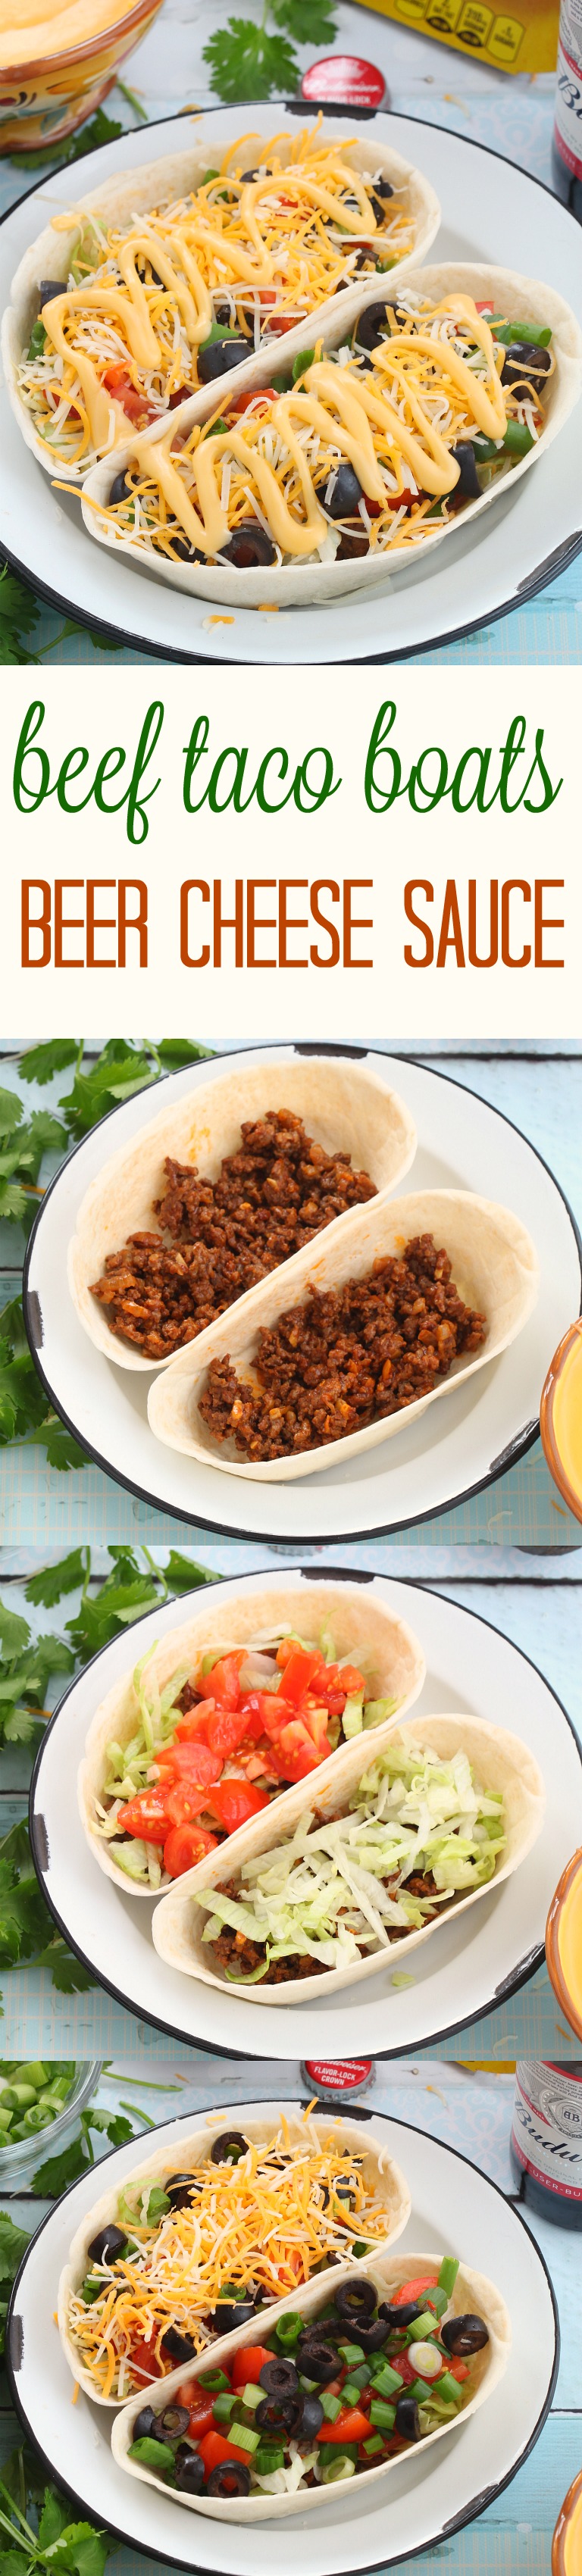 No matter what team are you on, you'll be a winner once you share these beef taco boats with beer cheese sauce at the Super Bowl party!